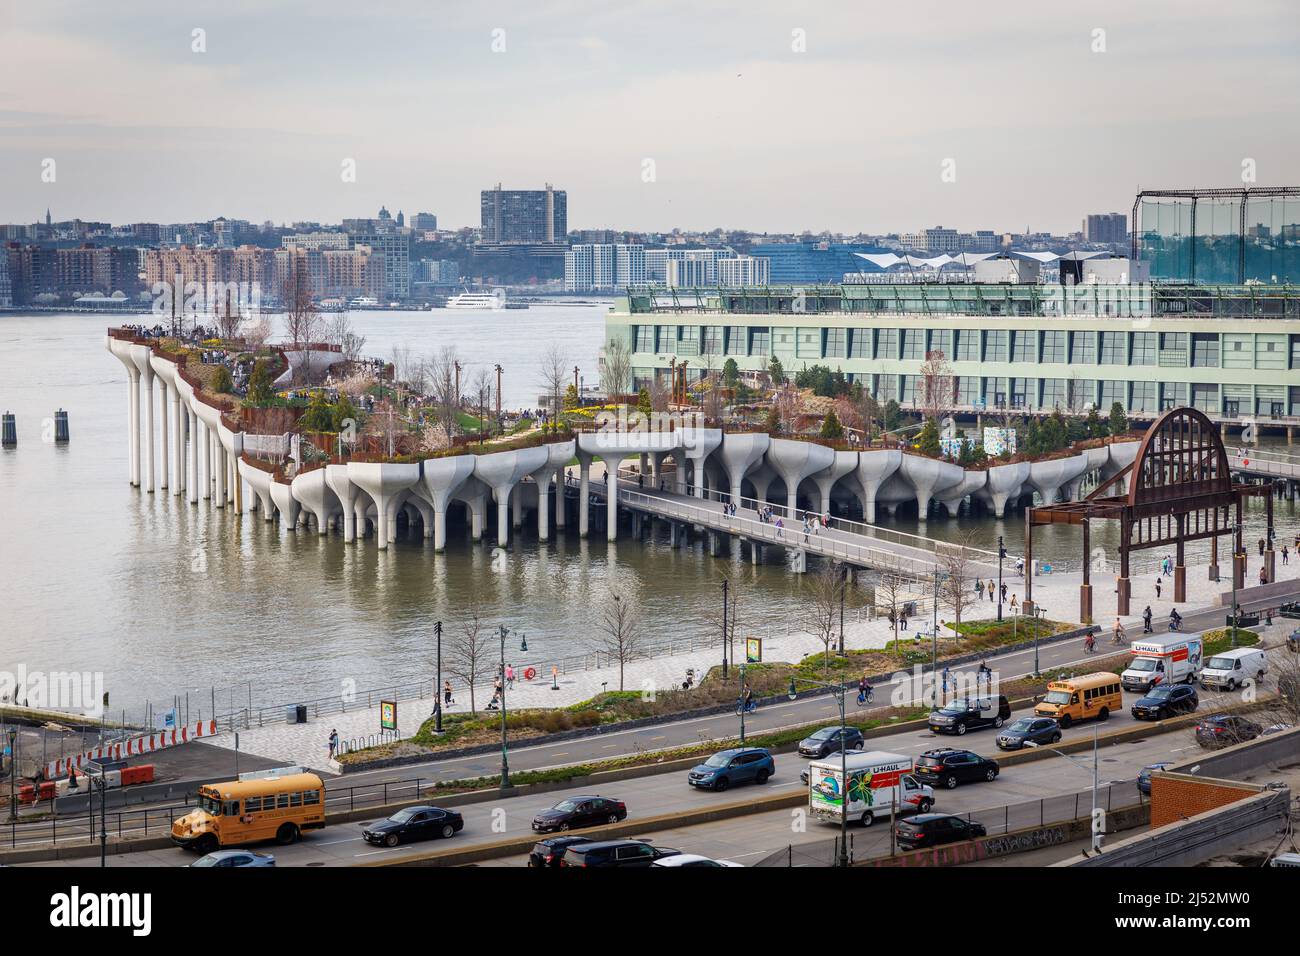 Little Island at Pier 55, artificial island, sits in Hudson River on 133 'tulips', opened 2021. Meatpacking District, New York, NY, USA. Stock Photo